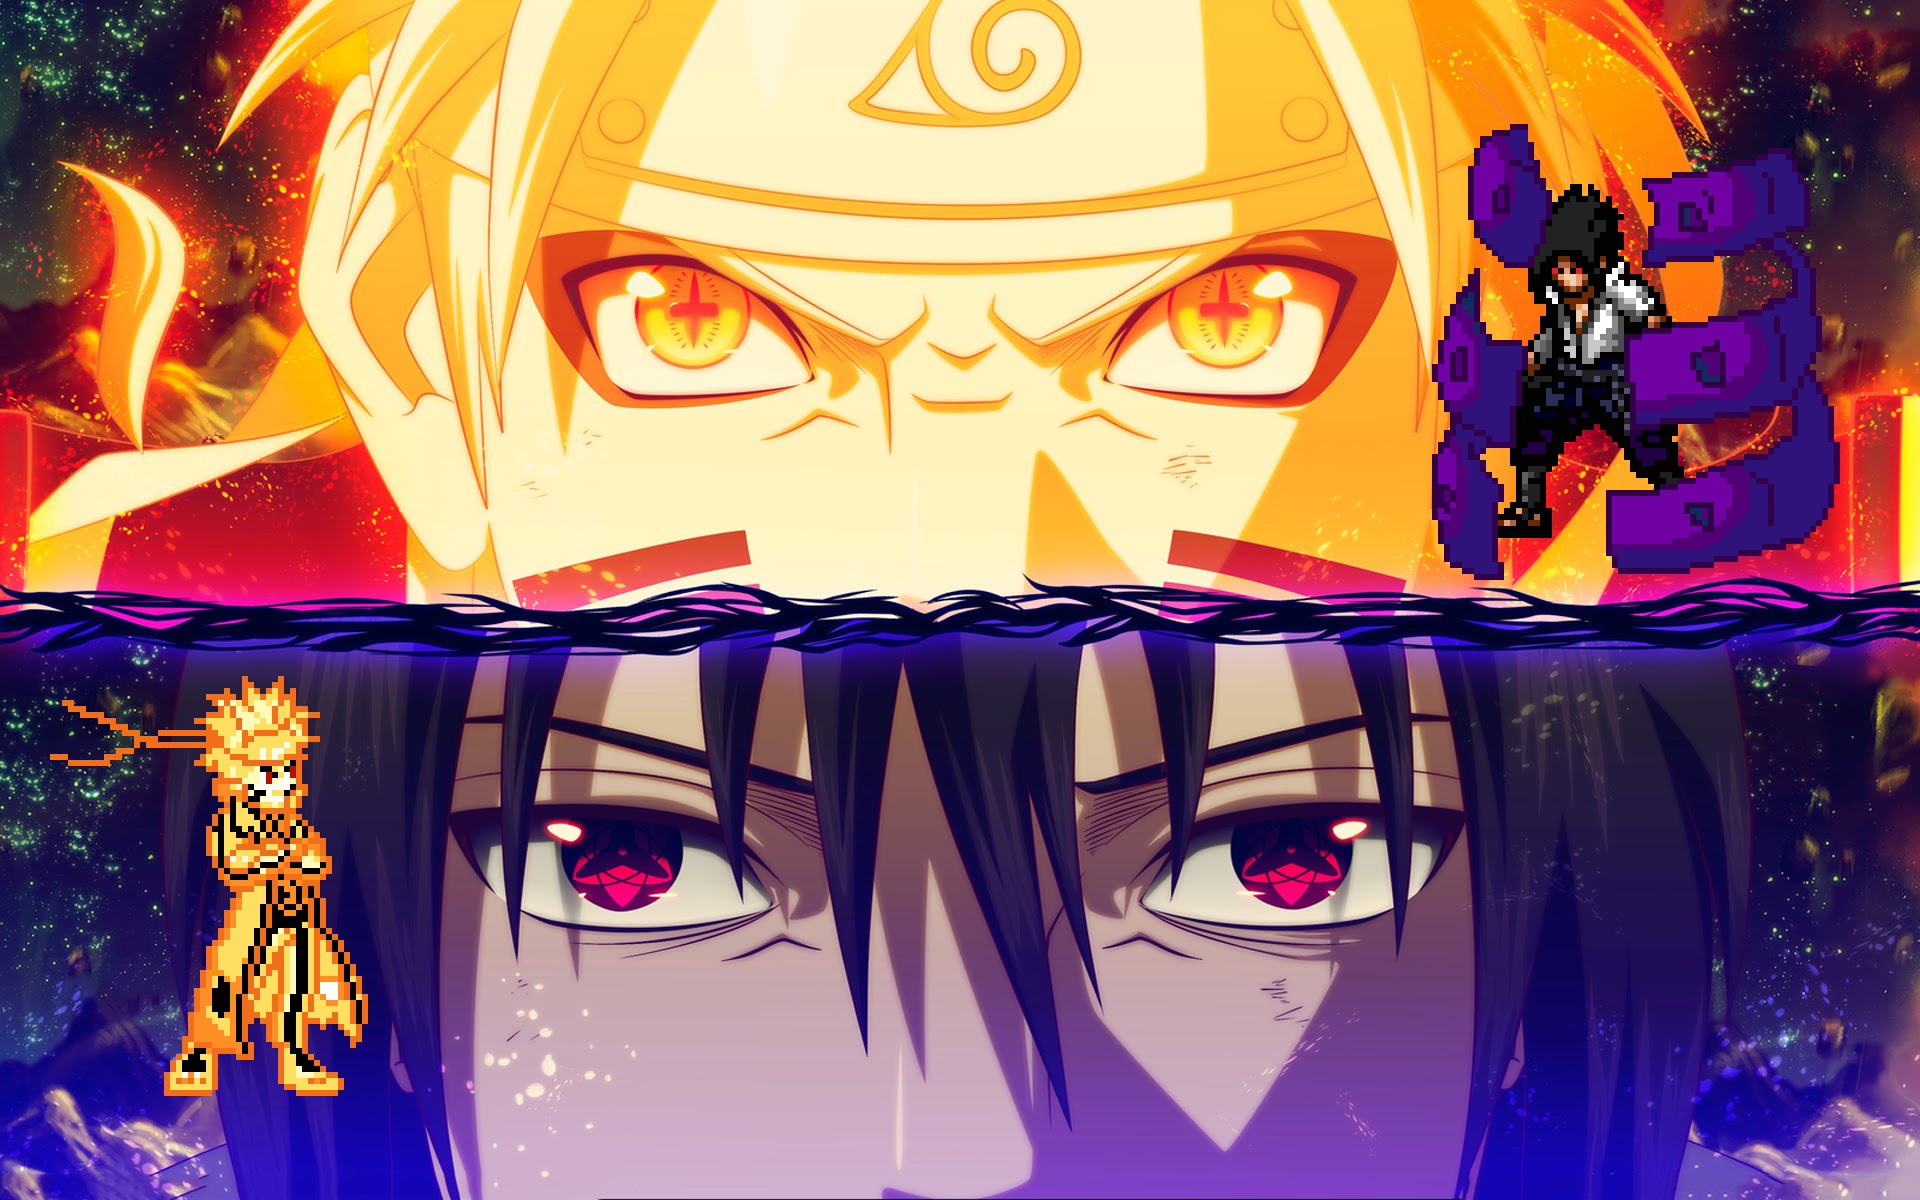 Community Forums: CLOSED: [LFP] Naruto Story (Multi-Campaign; Tues/Thurs;  10 AM EST Discord